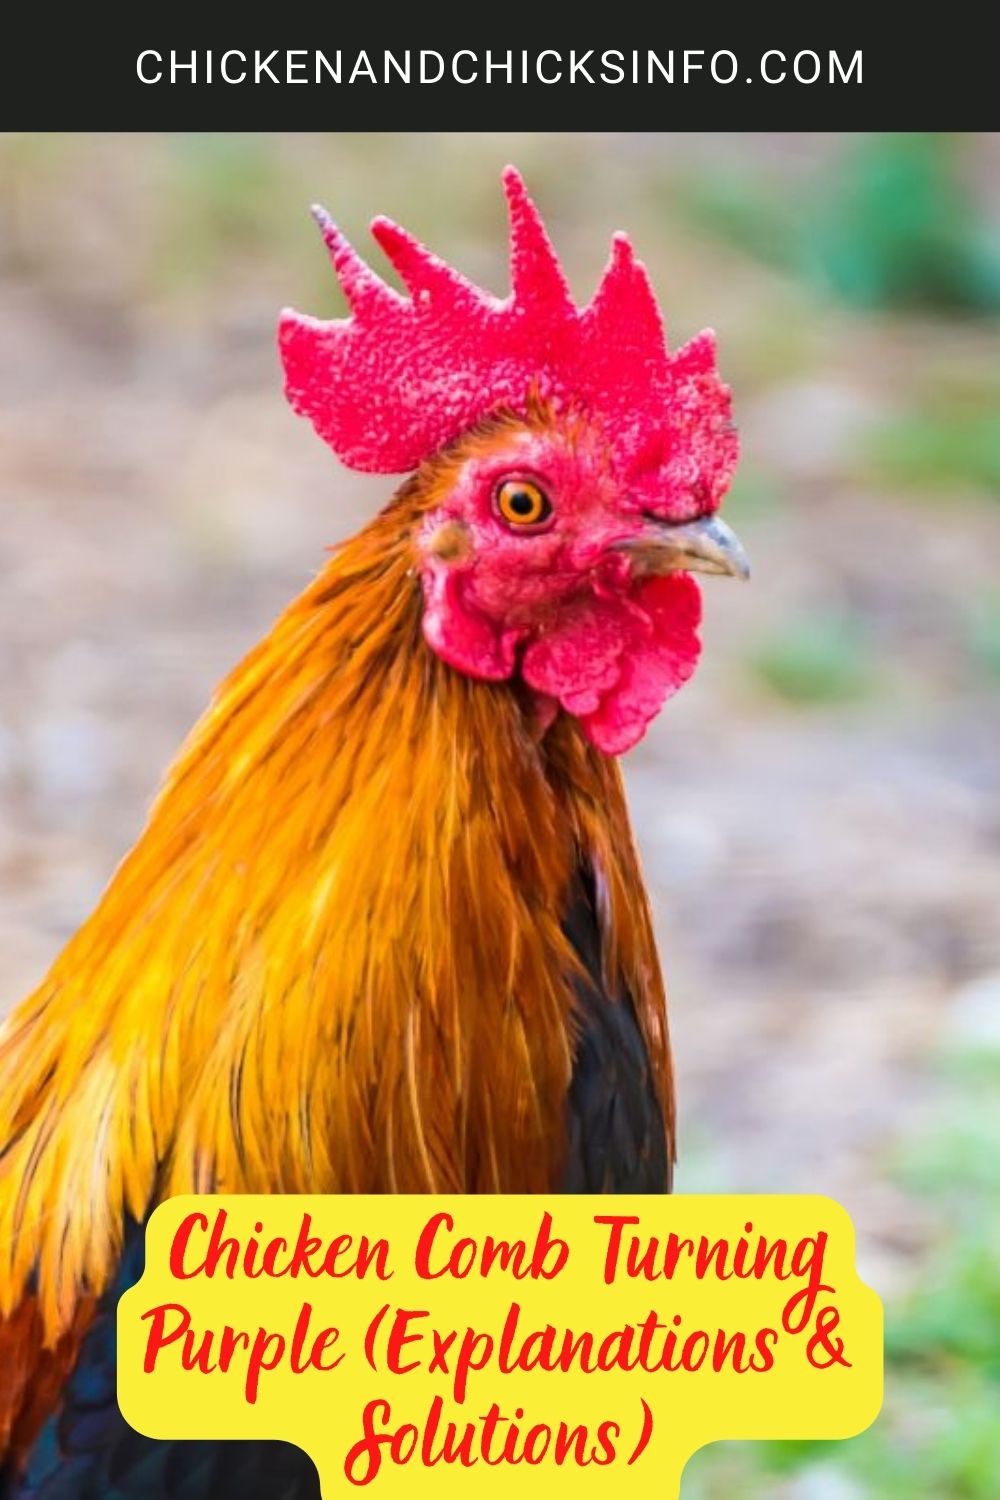 Chicken Comb Turning Purple (Explanations & Solutions) poster.
